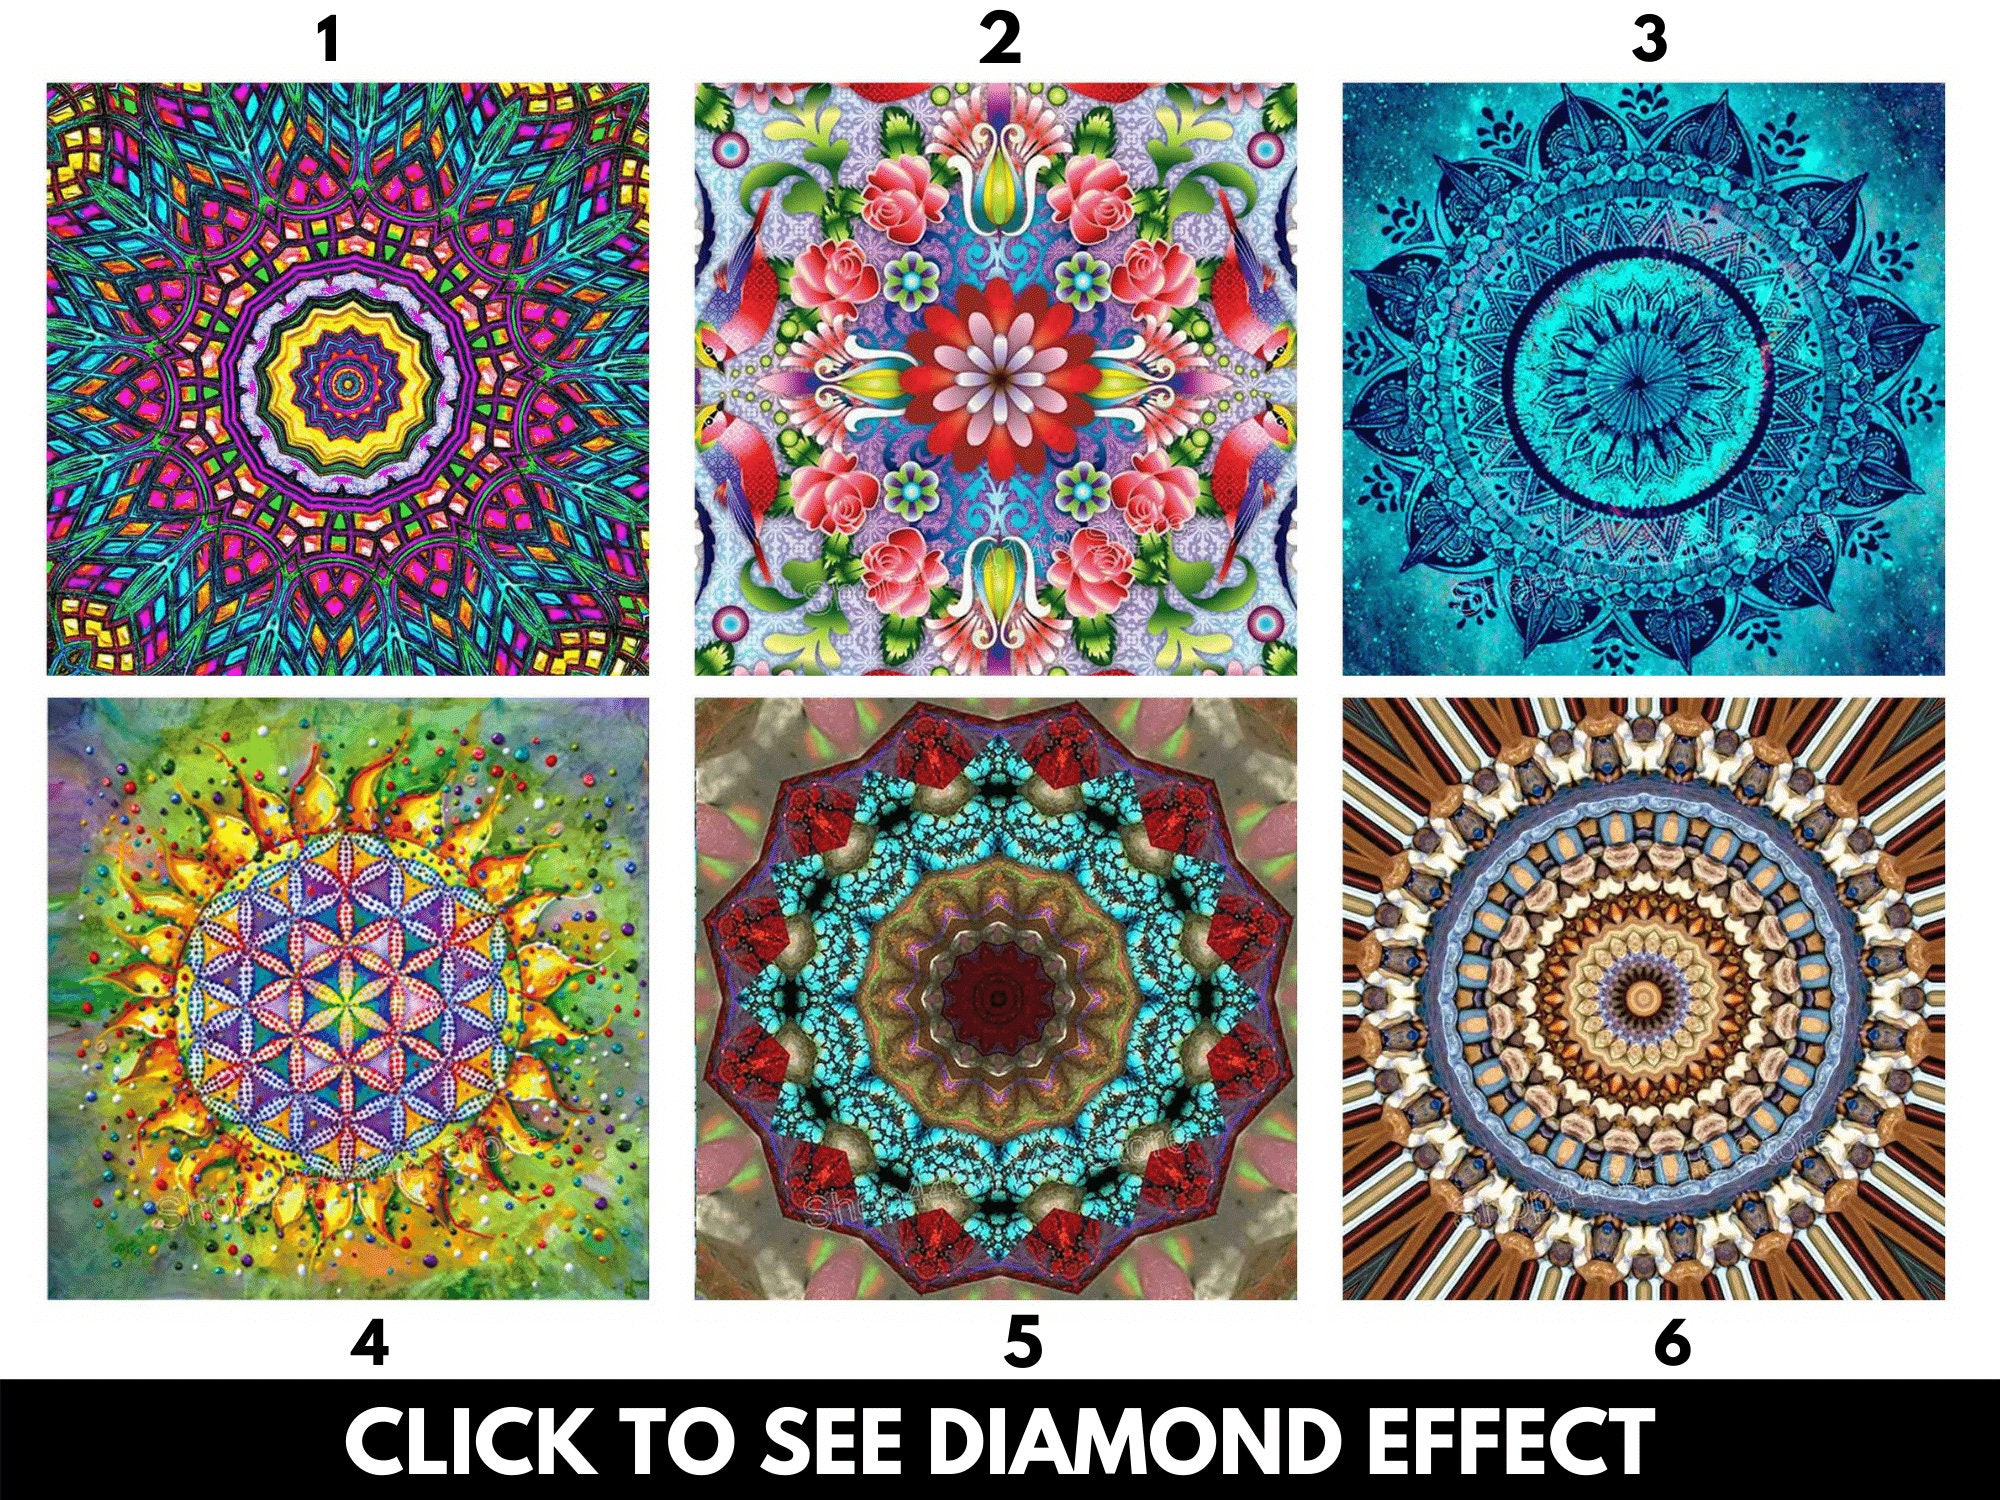 Suitable 5d Diy Large Diamond Painting Kit (11.8x15.7in/30x40cm), Scenery  Round Full Diamond Art Kit Picture Digital Kit For Home Wall Decor Gift